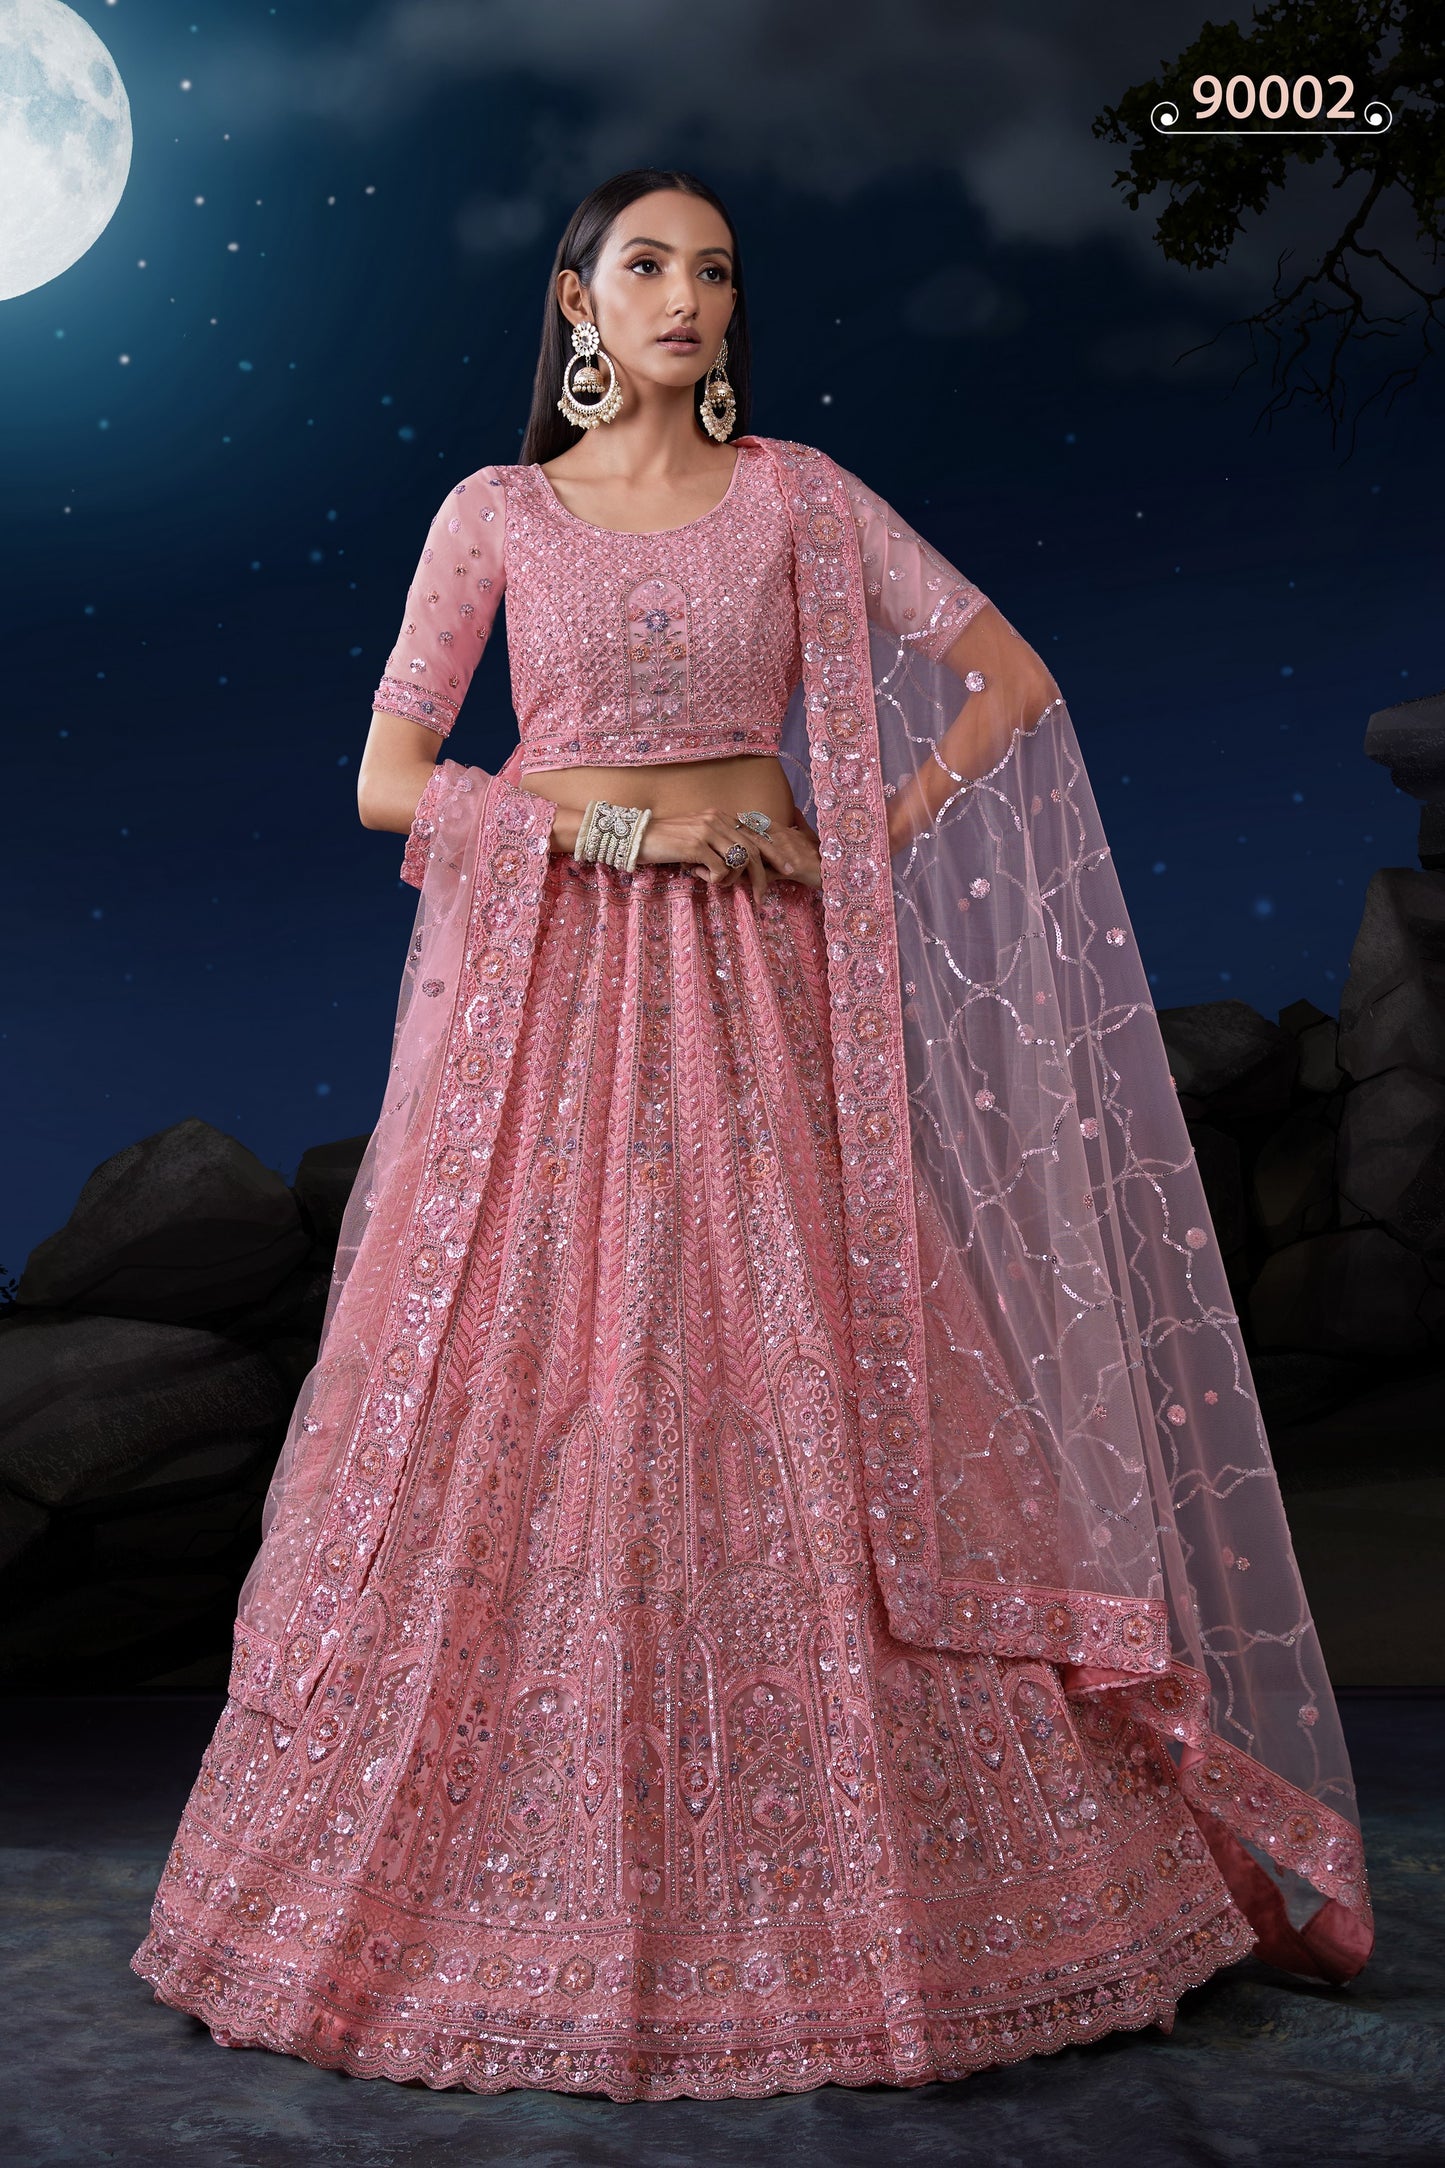 Pink Net Lehenga Choli For Indian Festivals & Weddings - Sequence Embroidery Work, Thread Embroidery Work, Zari Work, Zarkan Work, Dori Work